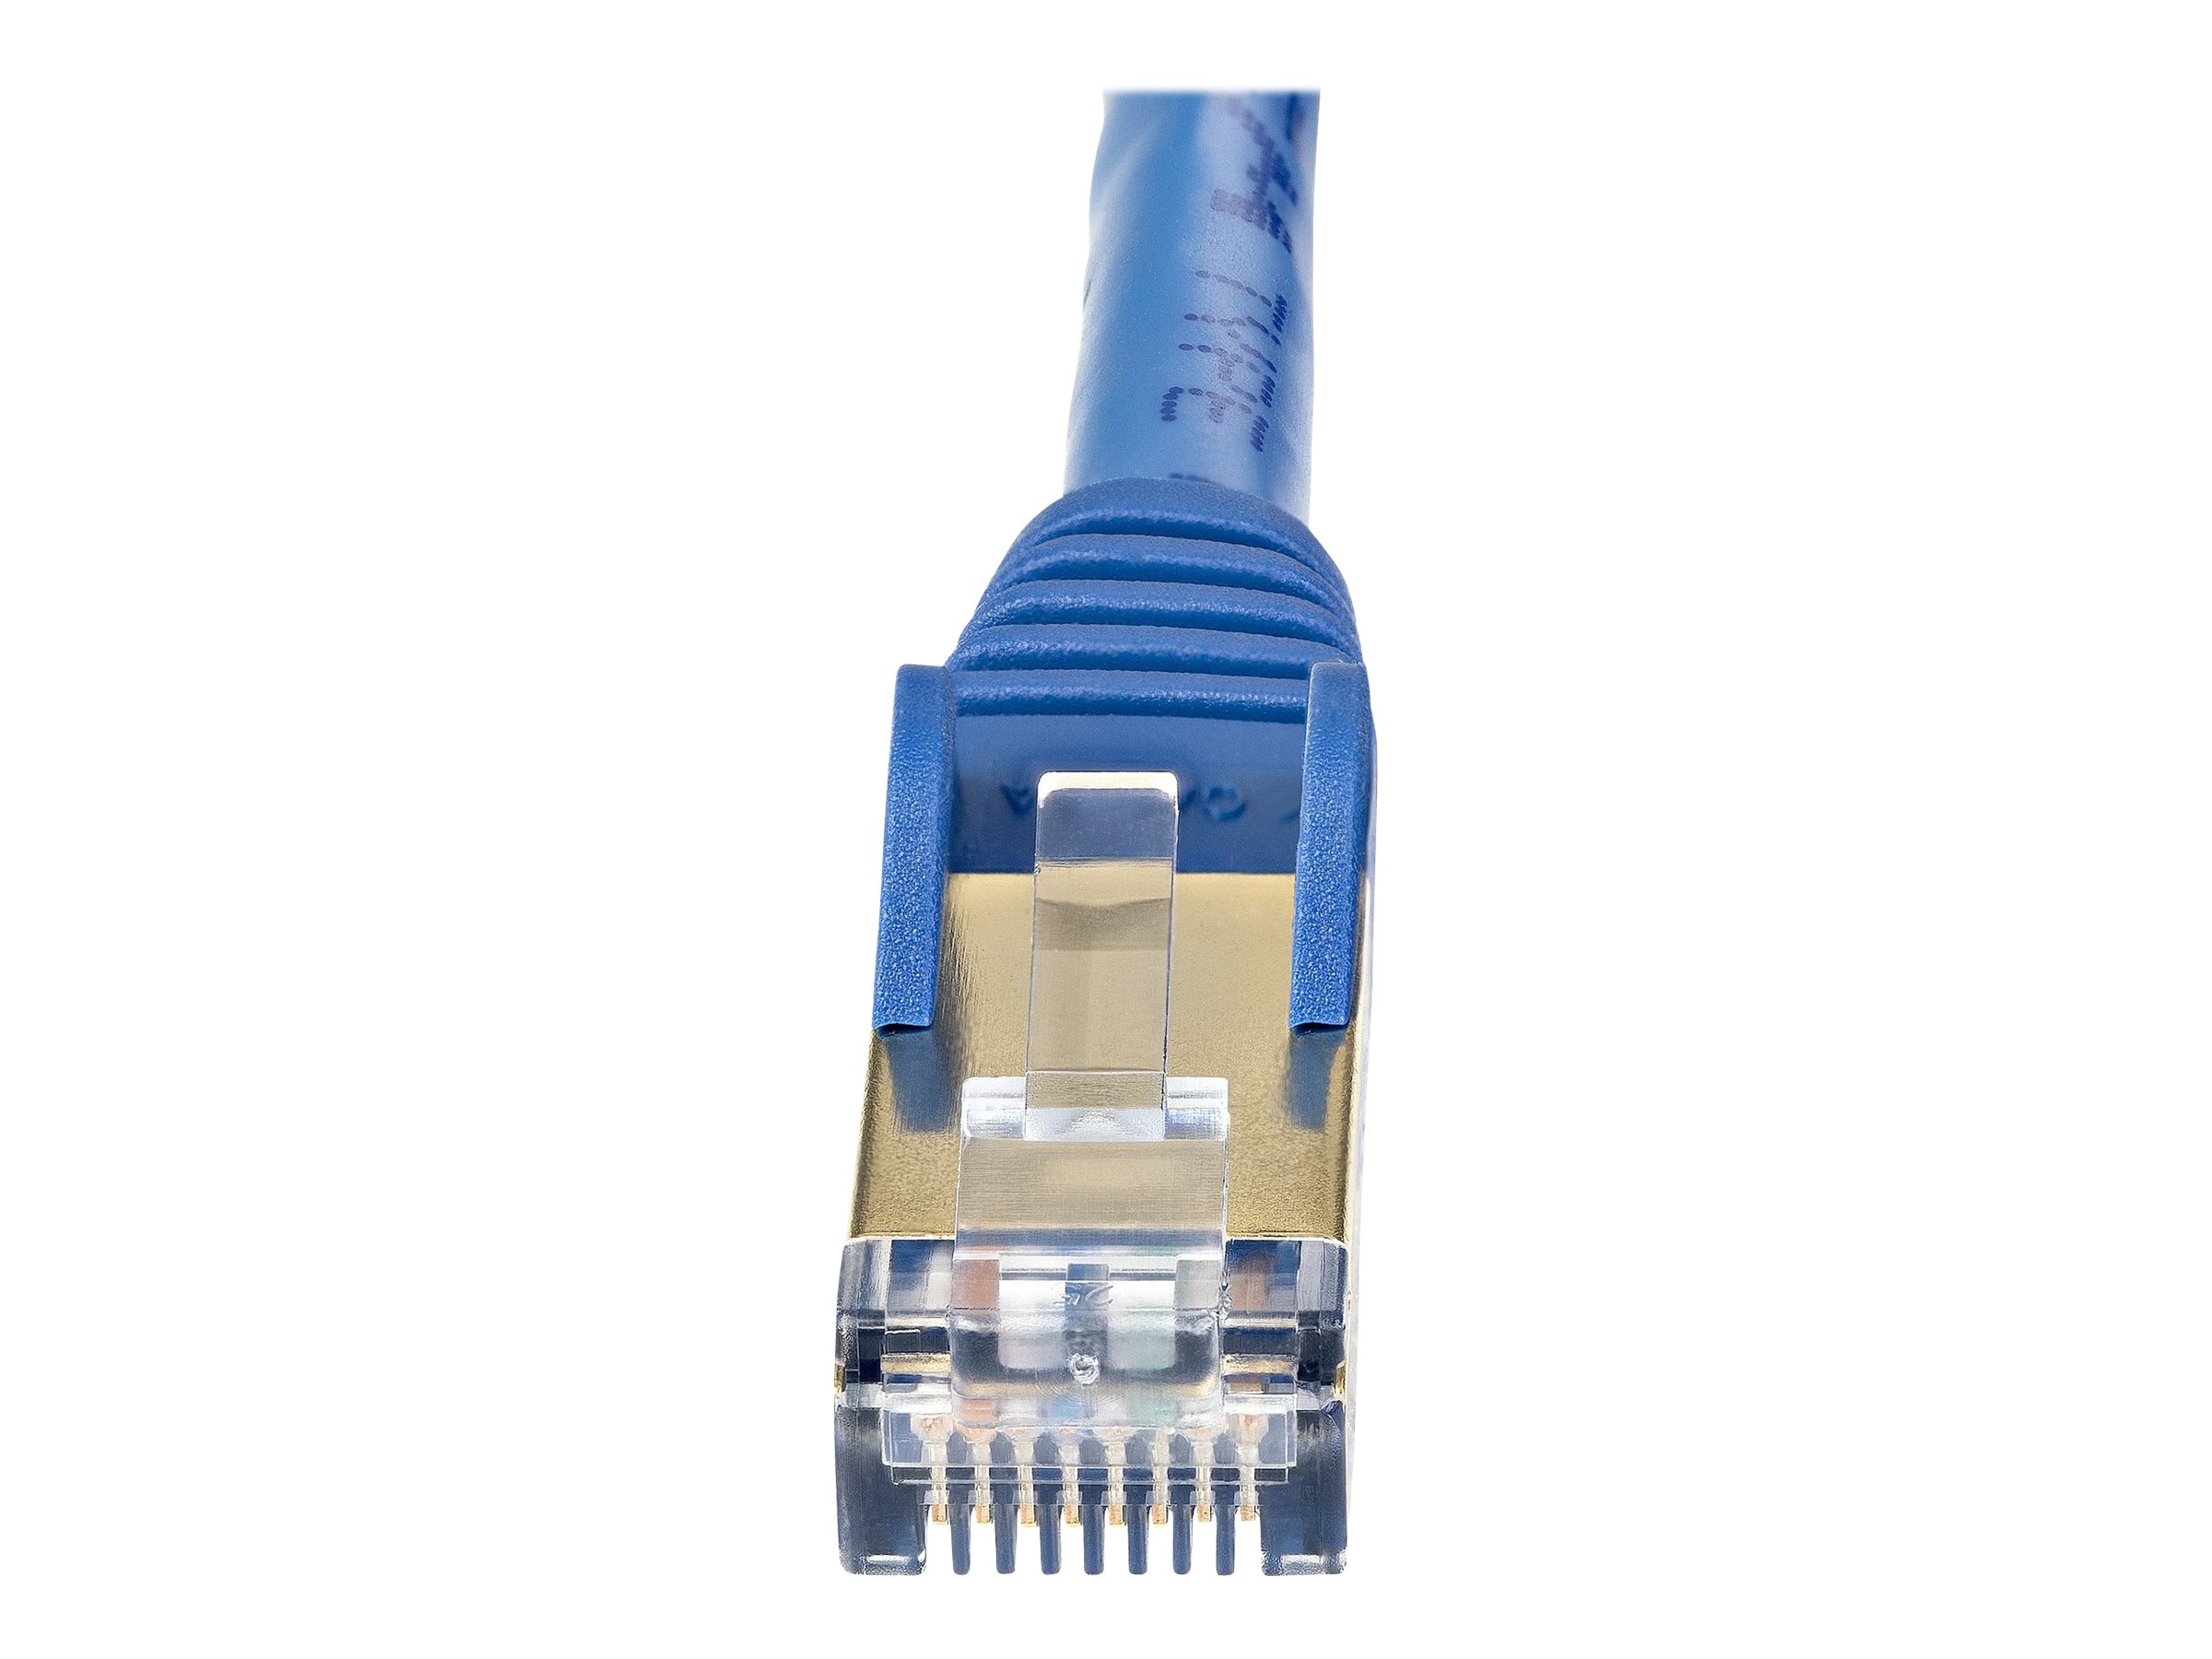 StarTech.com 5m CAT6A Ethernet Cable, 10 Gigabit Shielded Snagless RJ45 100W PoE Patch Cord, CAT 6A 10GbE STP Network Cable w/Strain Relief, Blue, Fluke Tested/UL Certified Wiring/TIA - Category 6A - 26AWG (6ASPAT5MBL)